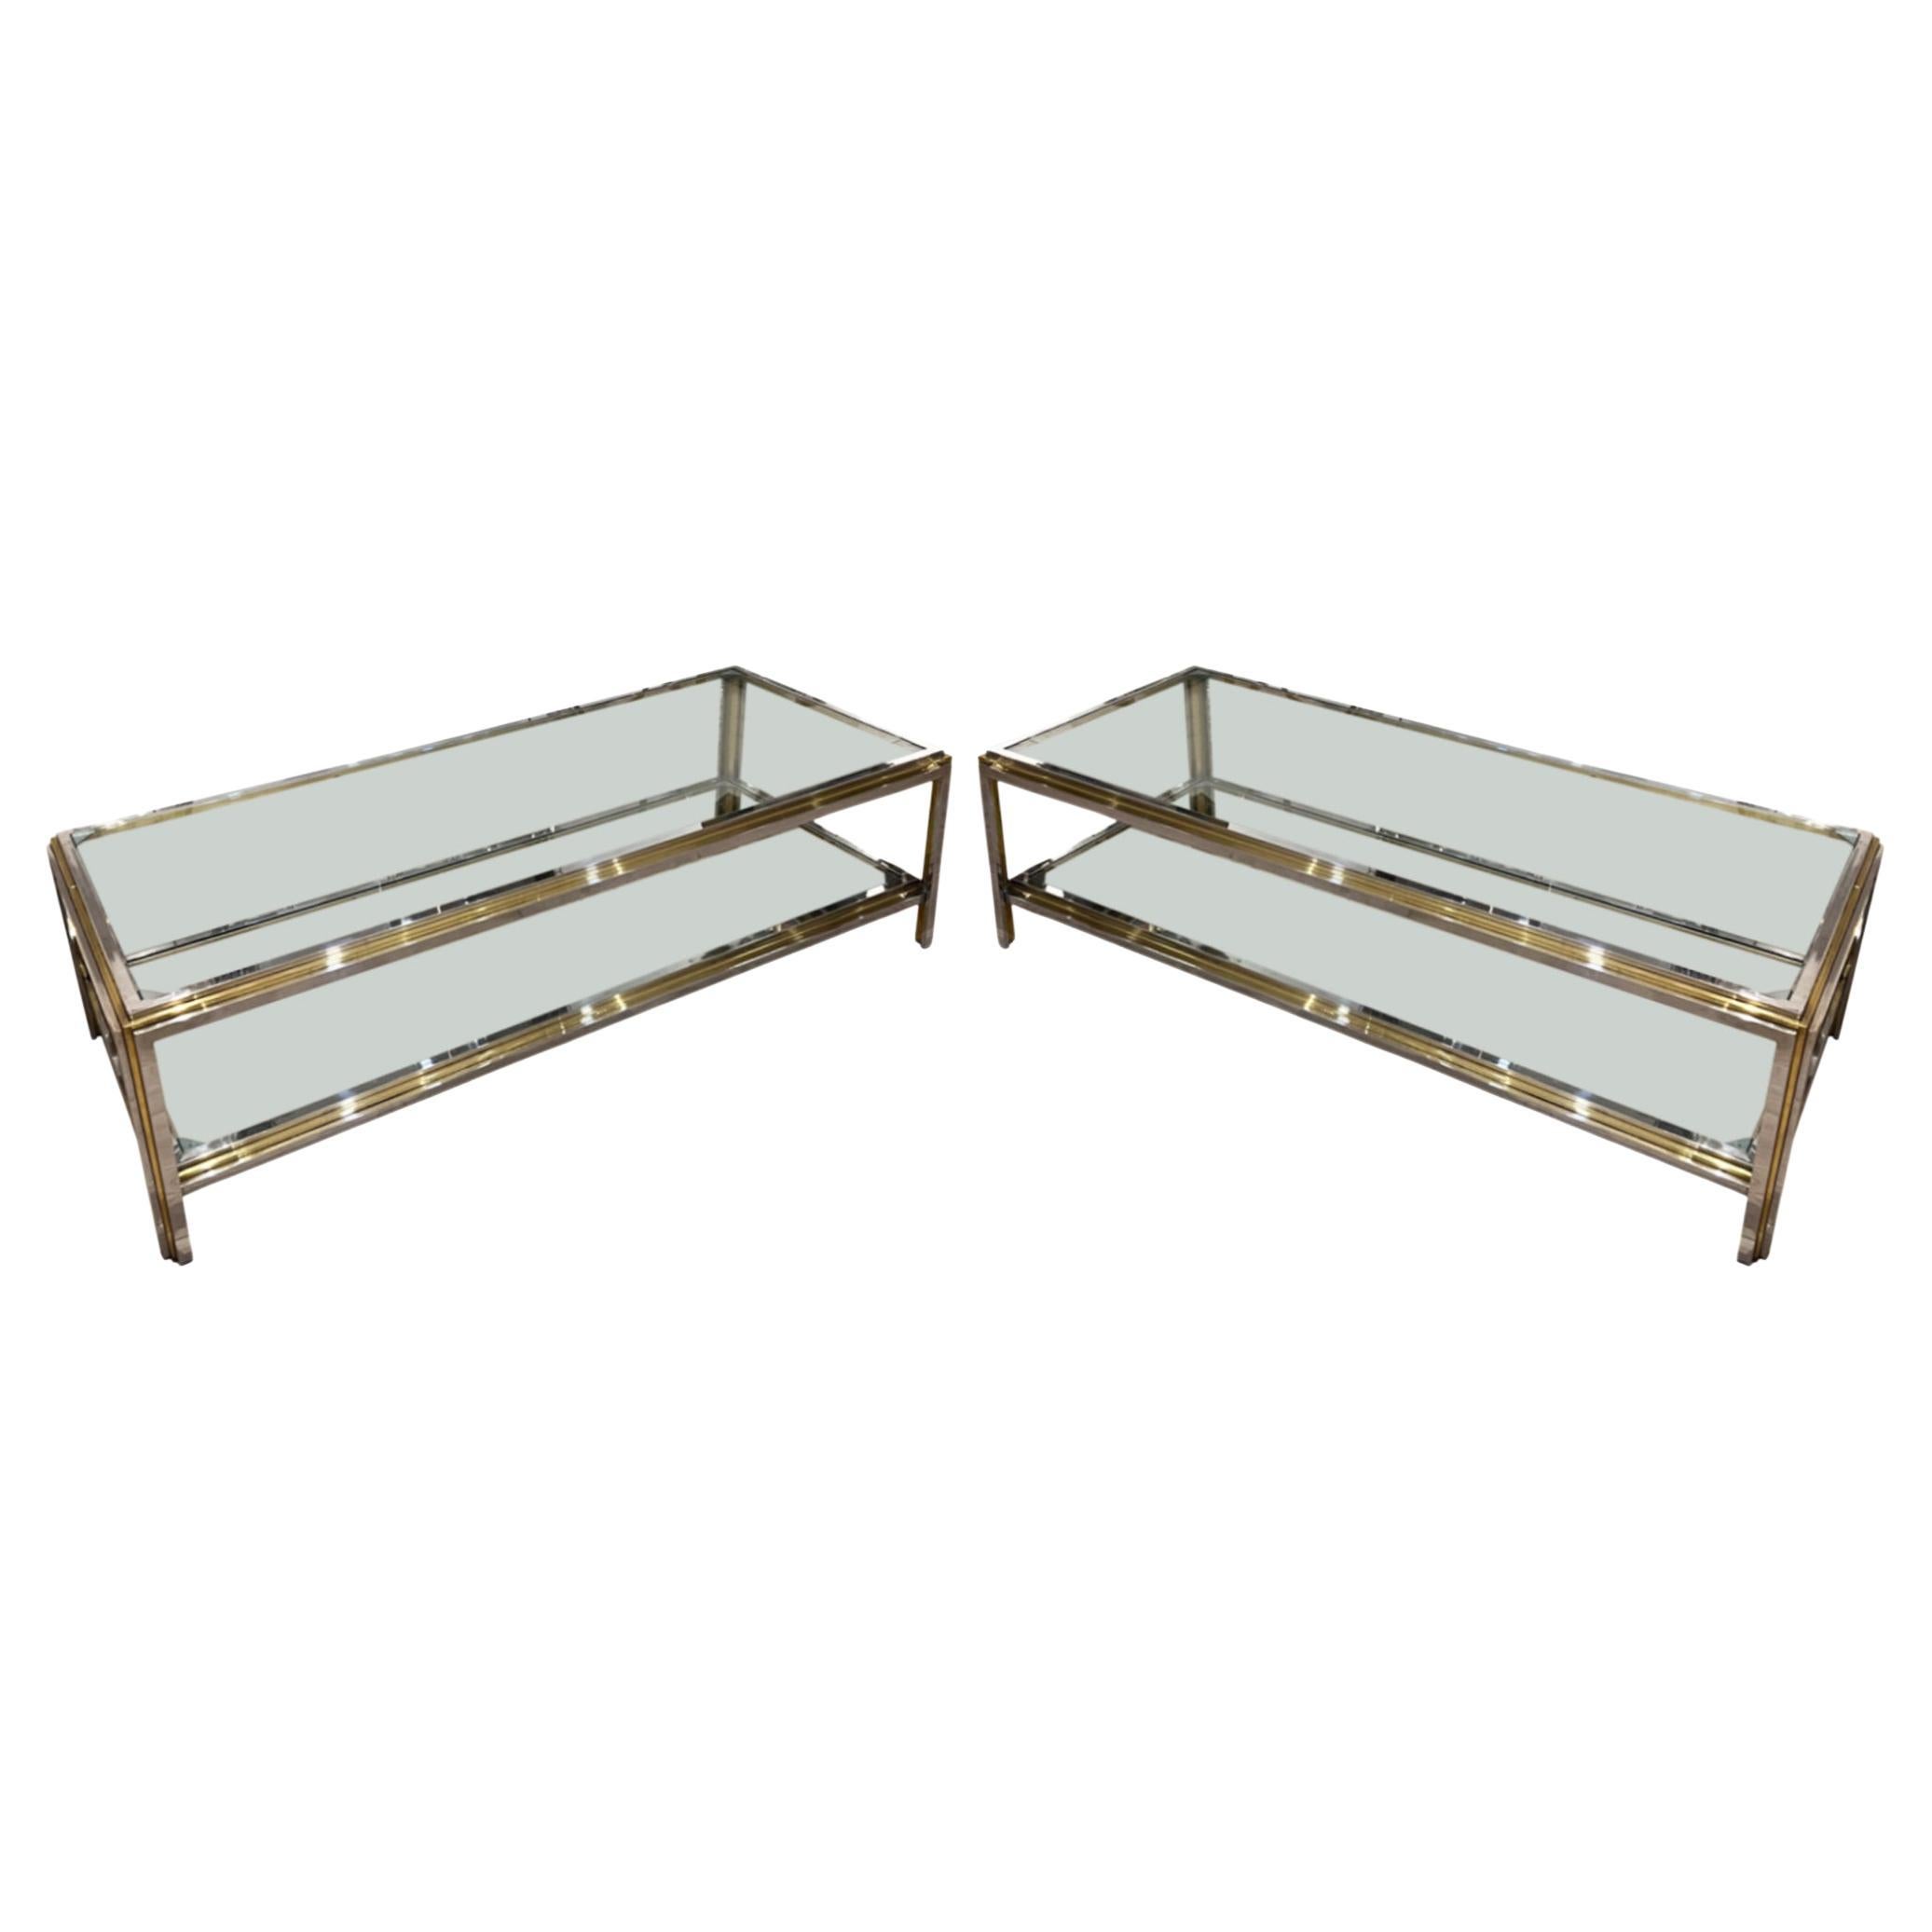 Pair of Chrome and Brass Coffee Tables (Can Be Sold Separately)